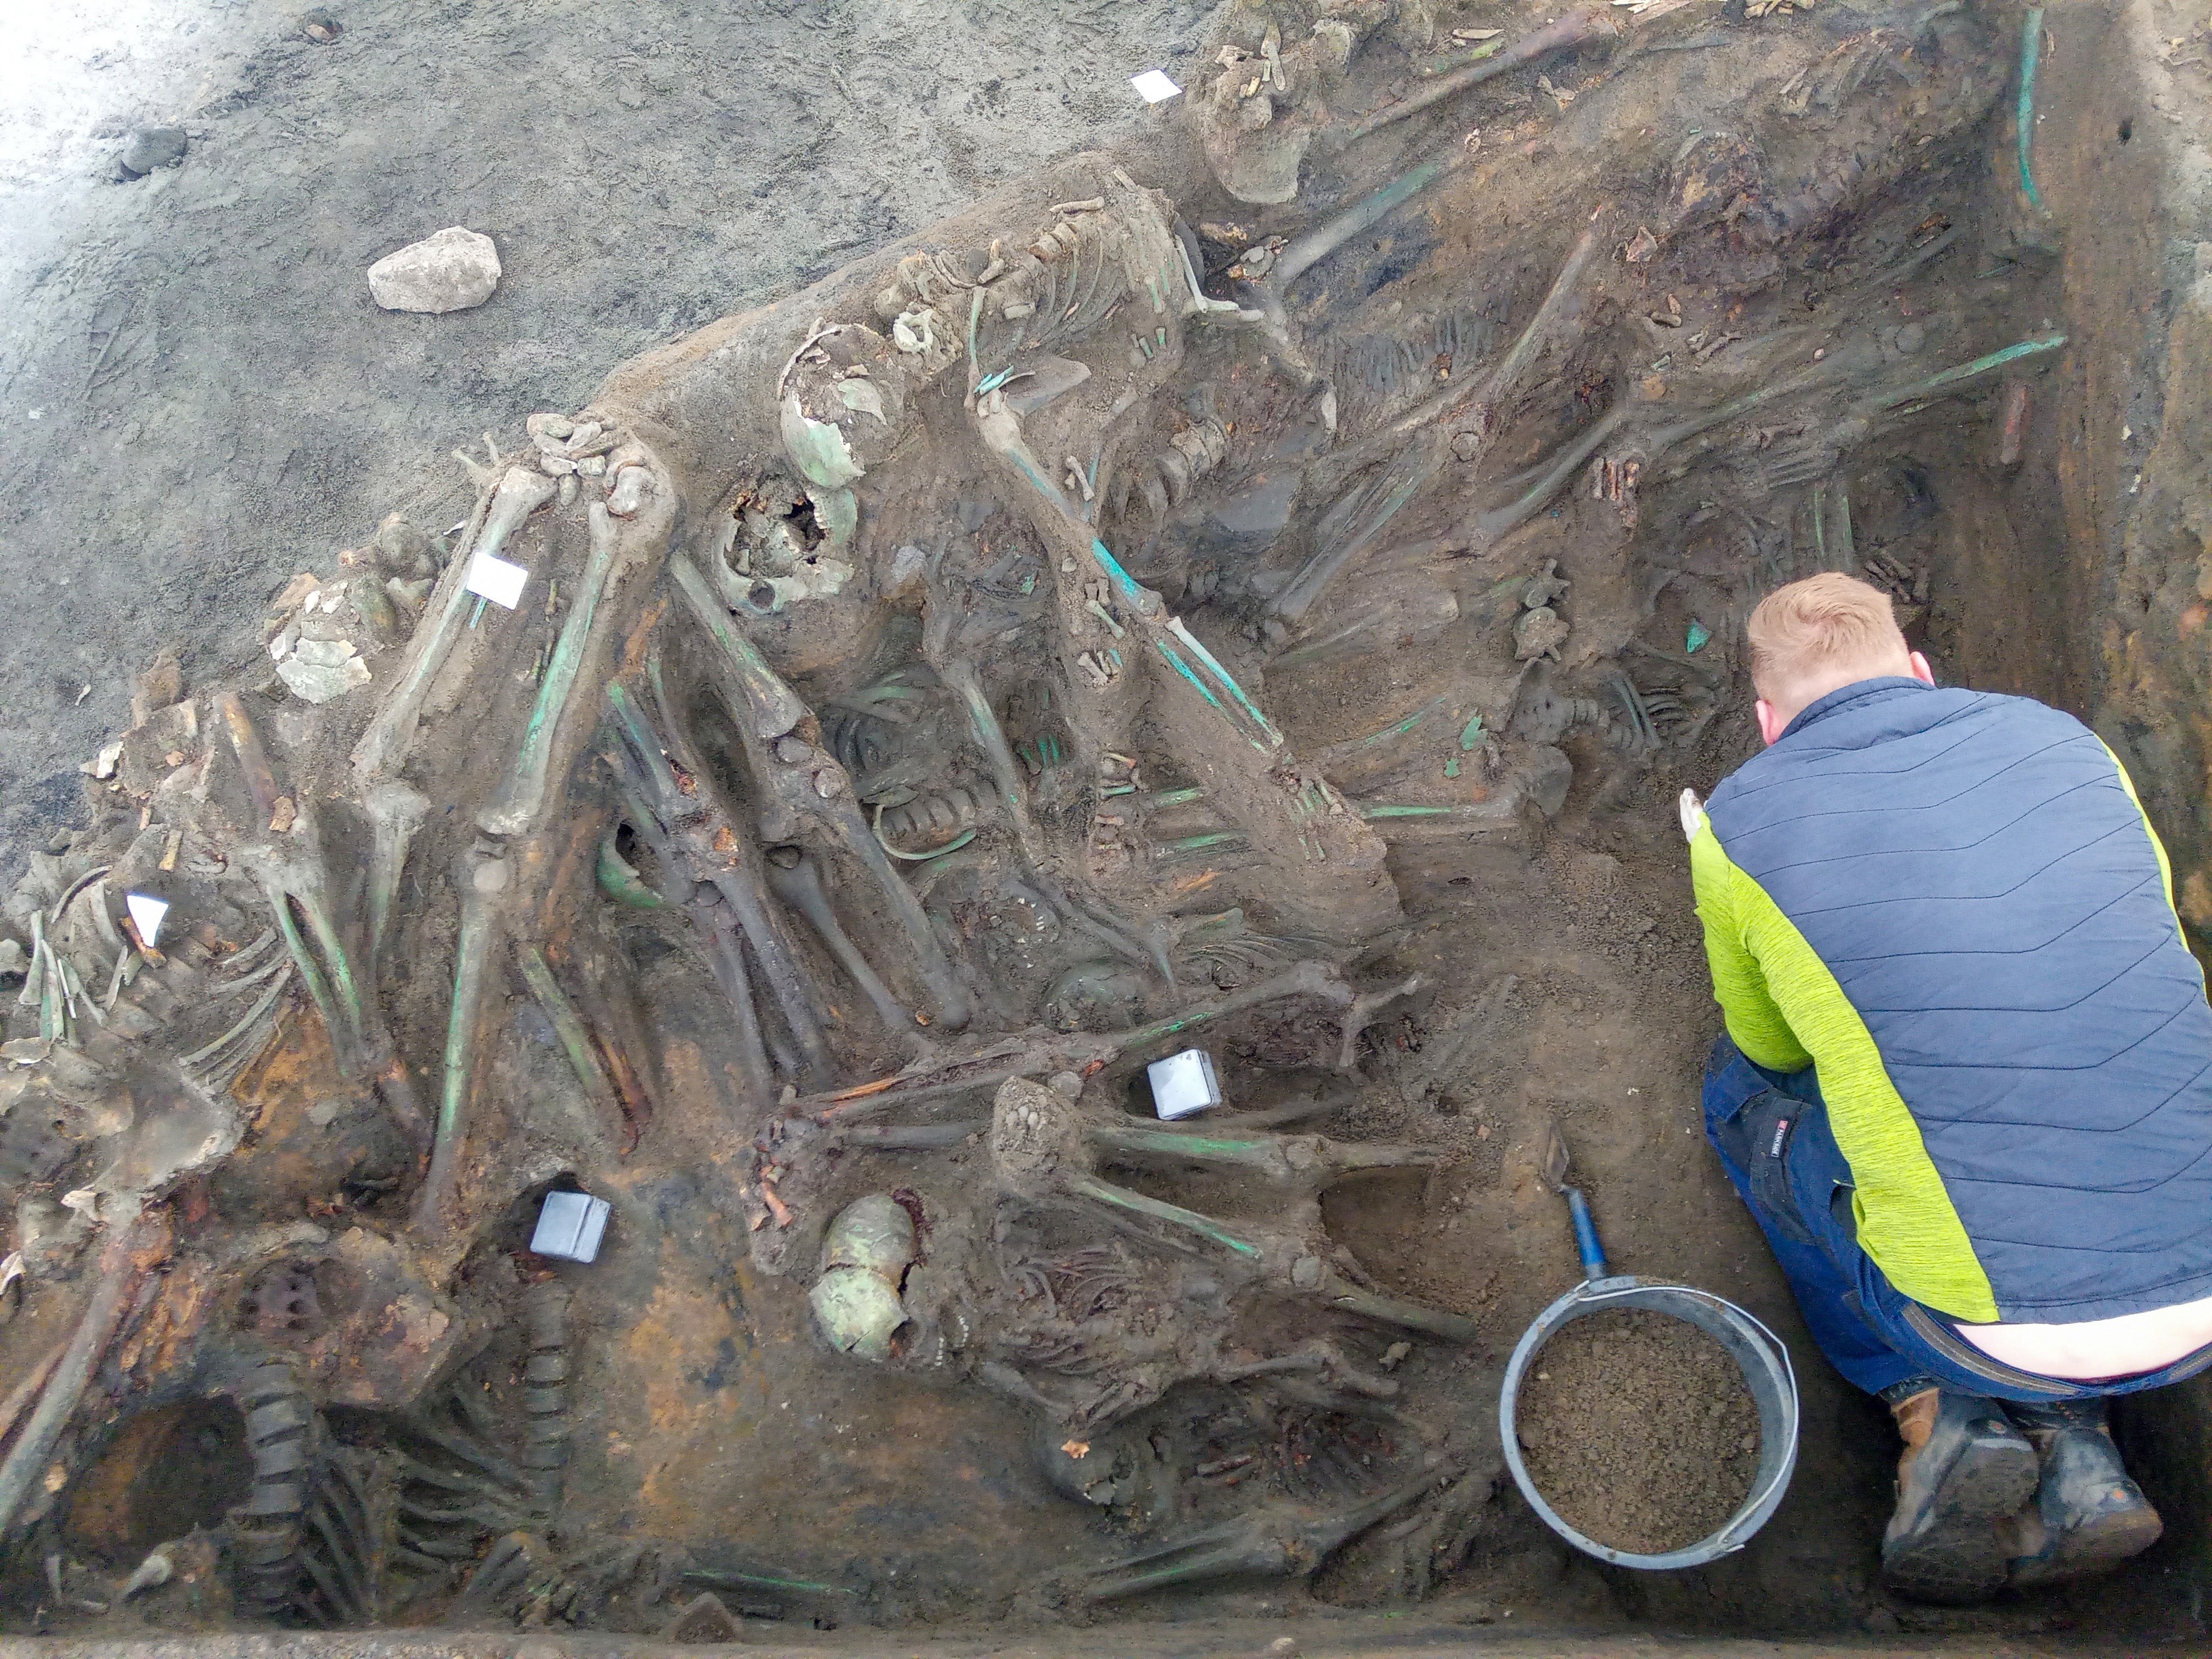 Tightly packed skeletons in mass grave unearthed in Nuremberg